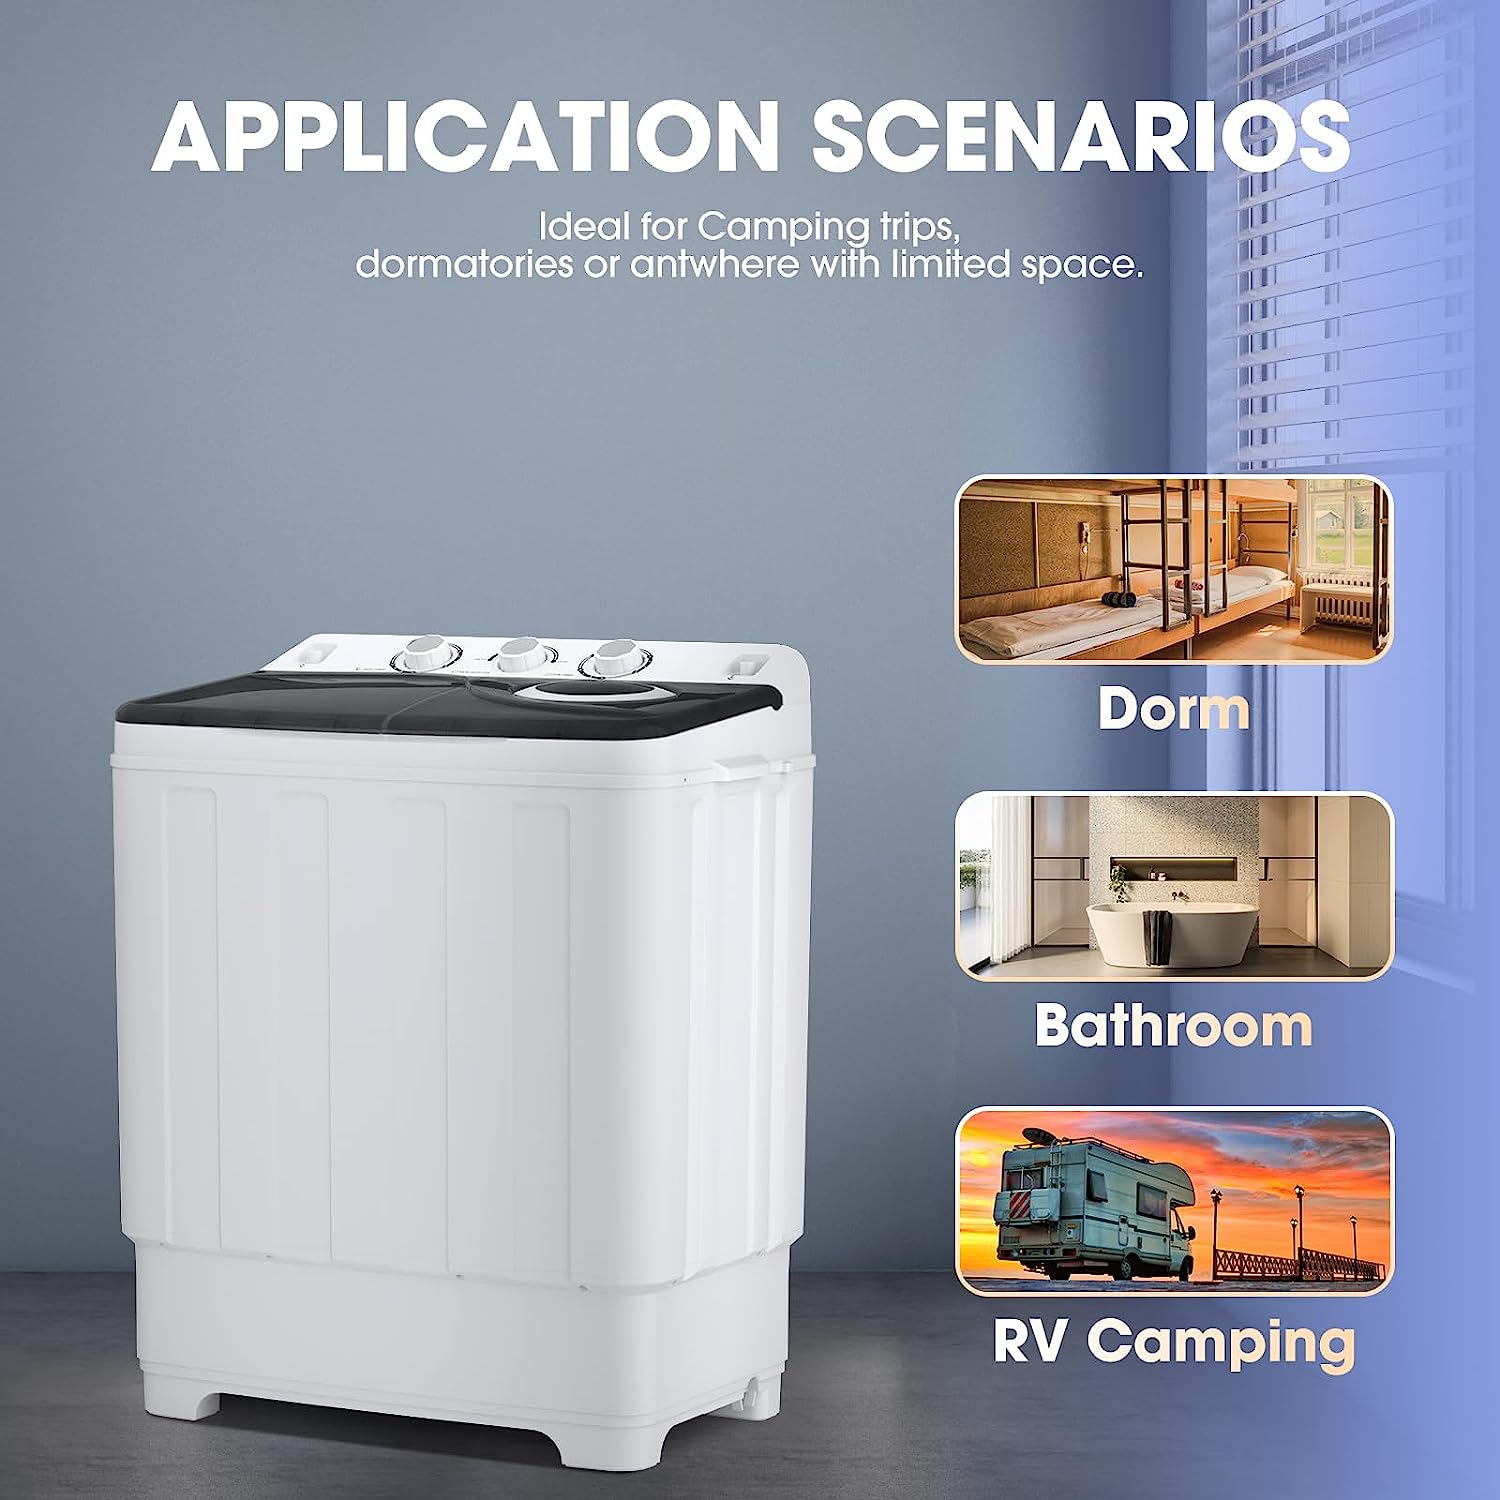 Portable Washing Machine Full Automatic Compact Washer Spin Dryer